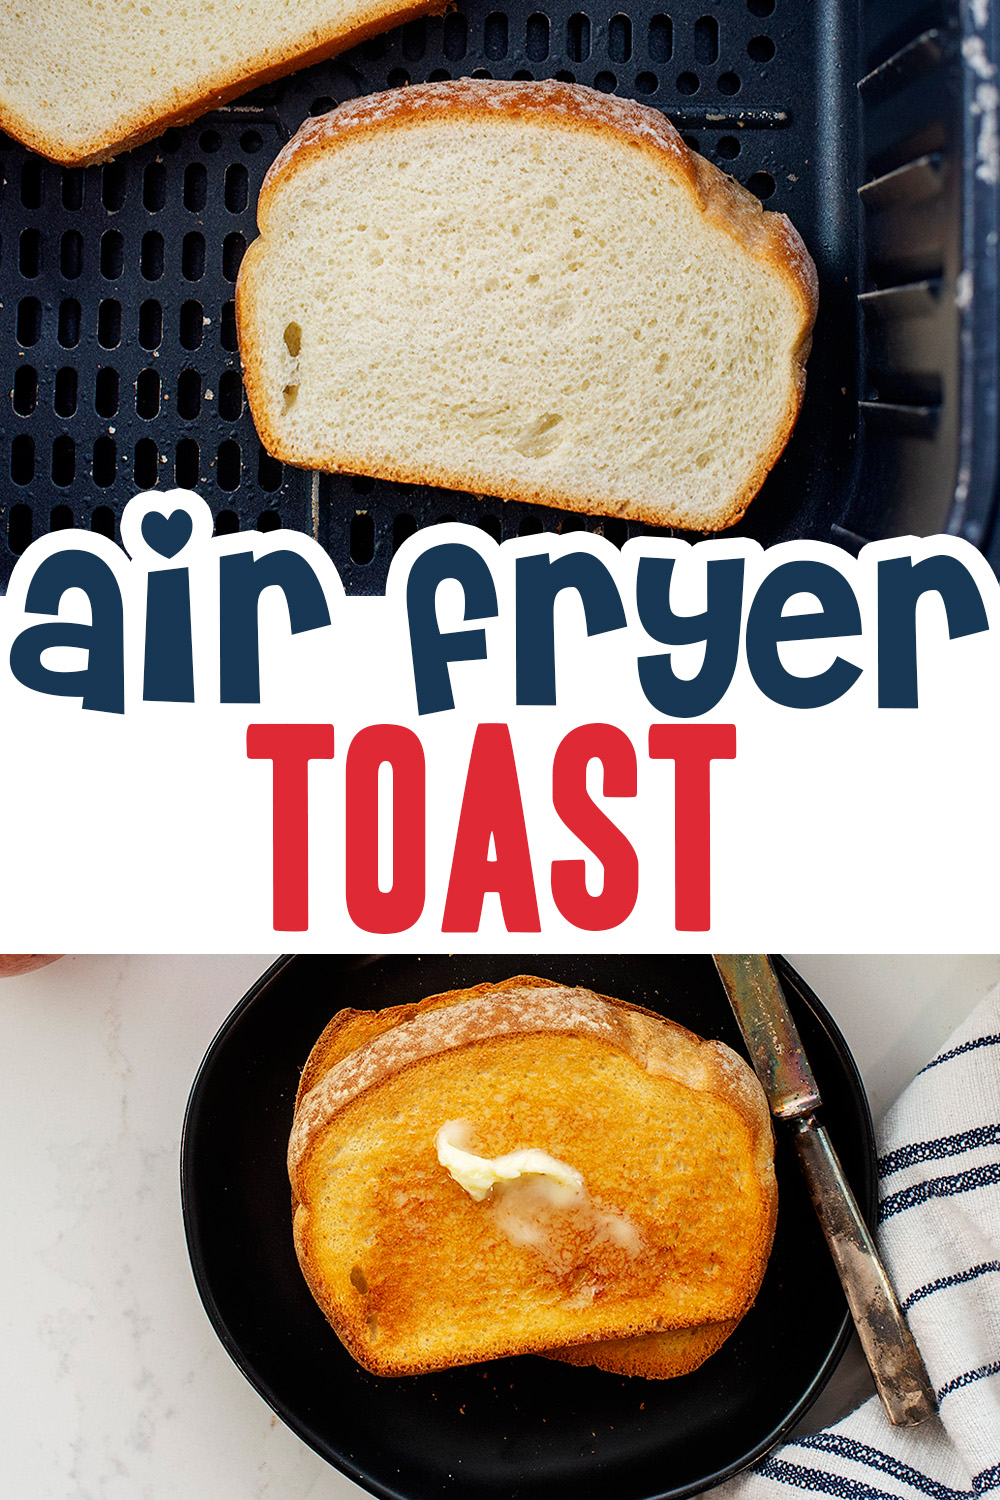 This recipe for air fryer toast is just as easy as a toaster, but the toast is a little crisper.